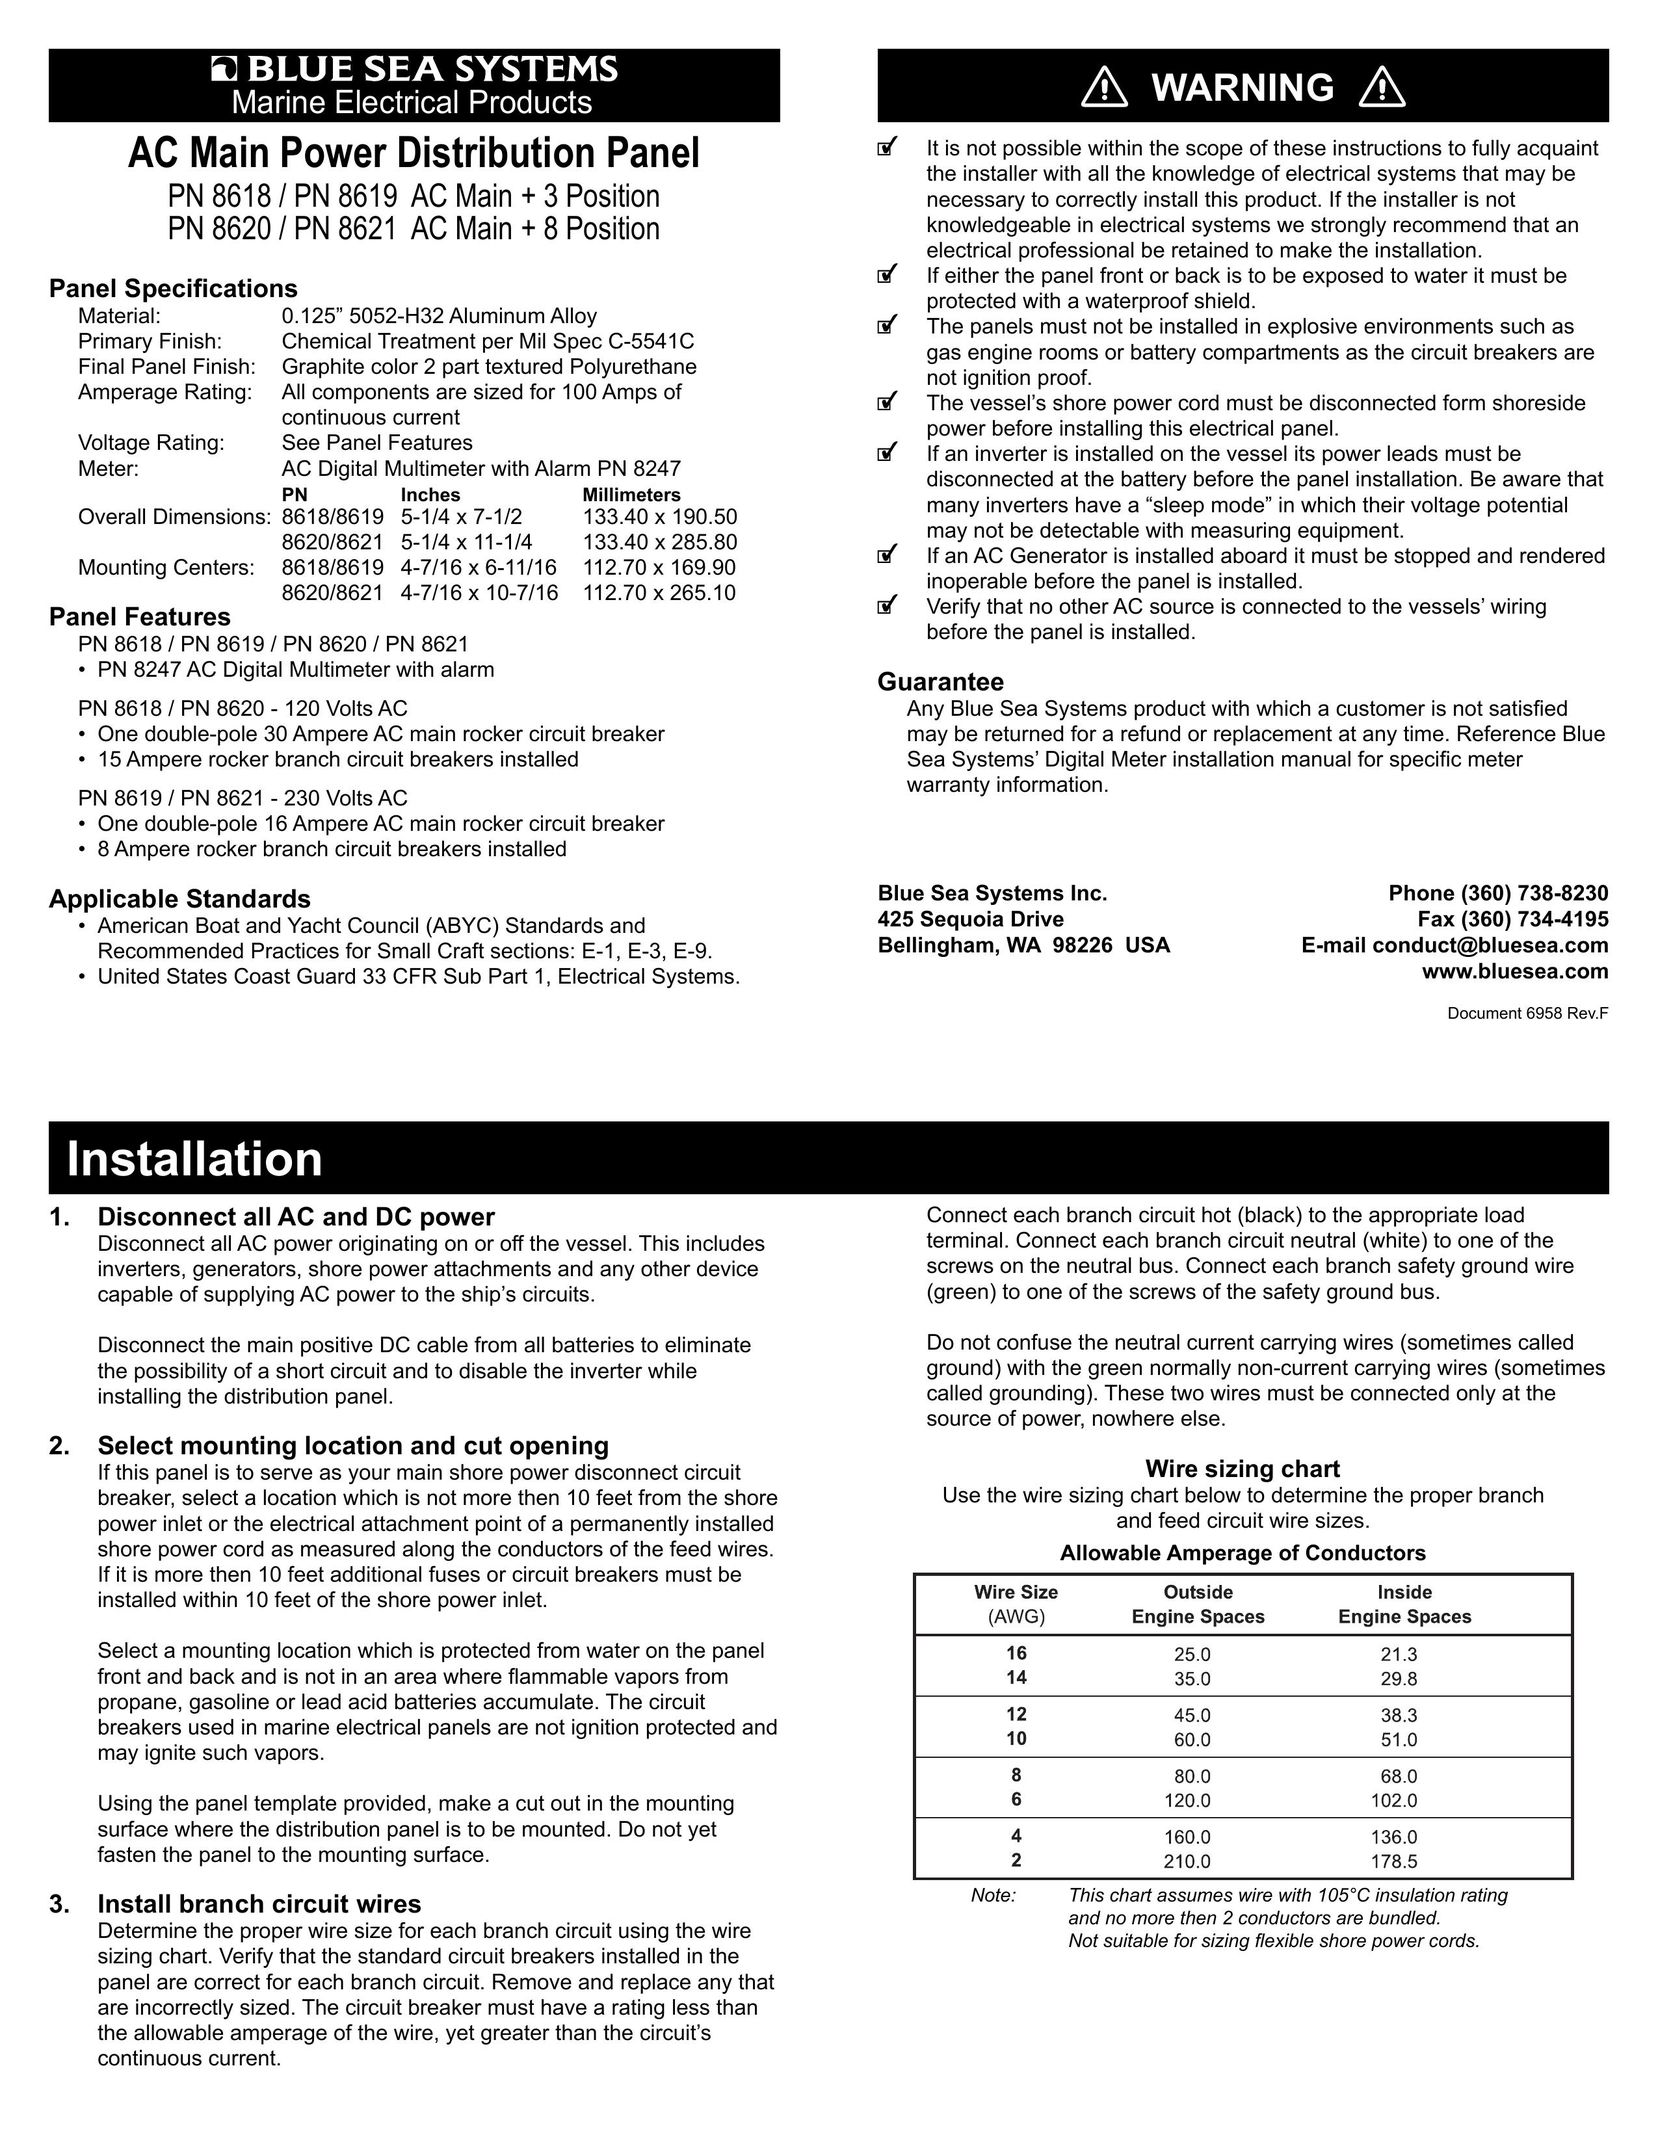 Blue Sea Systems PN 8621 Power Supply User Manual